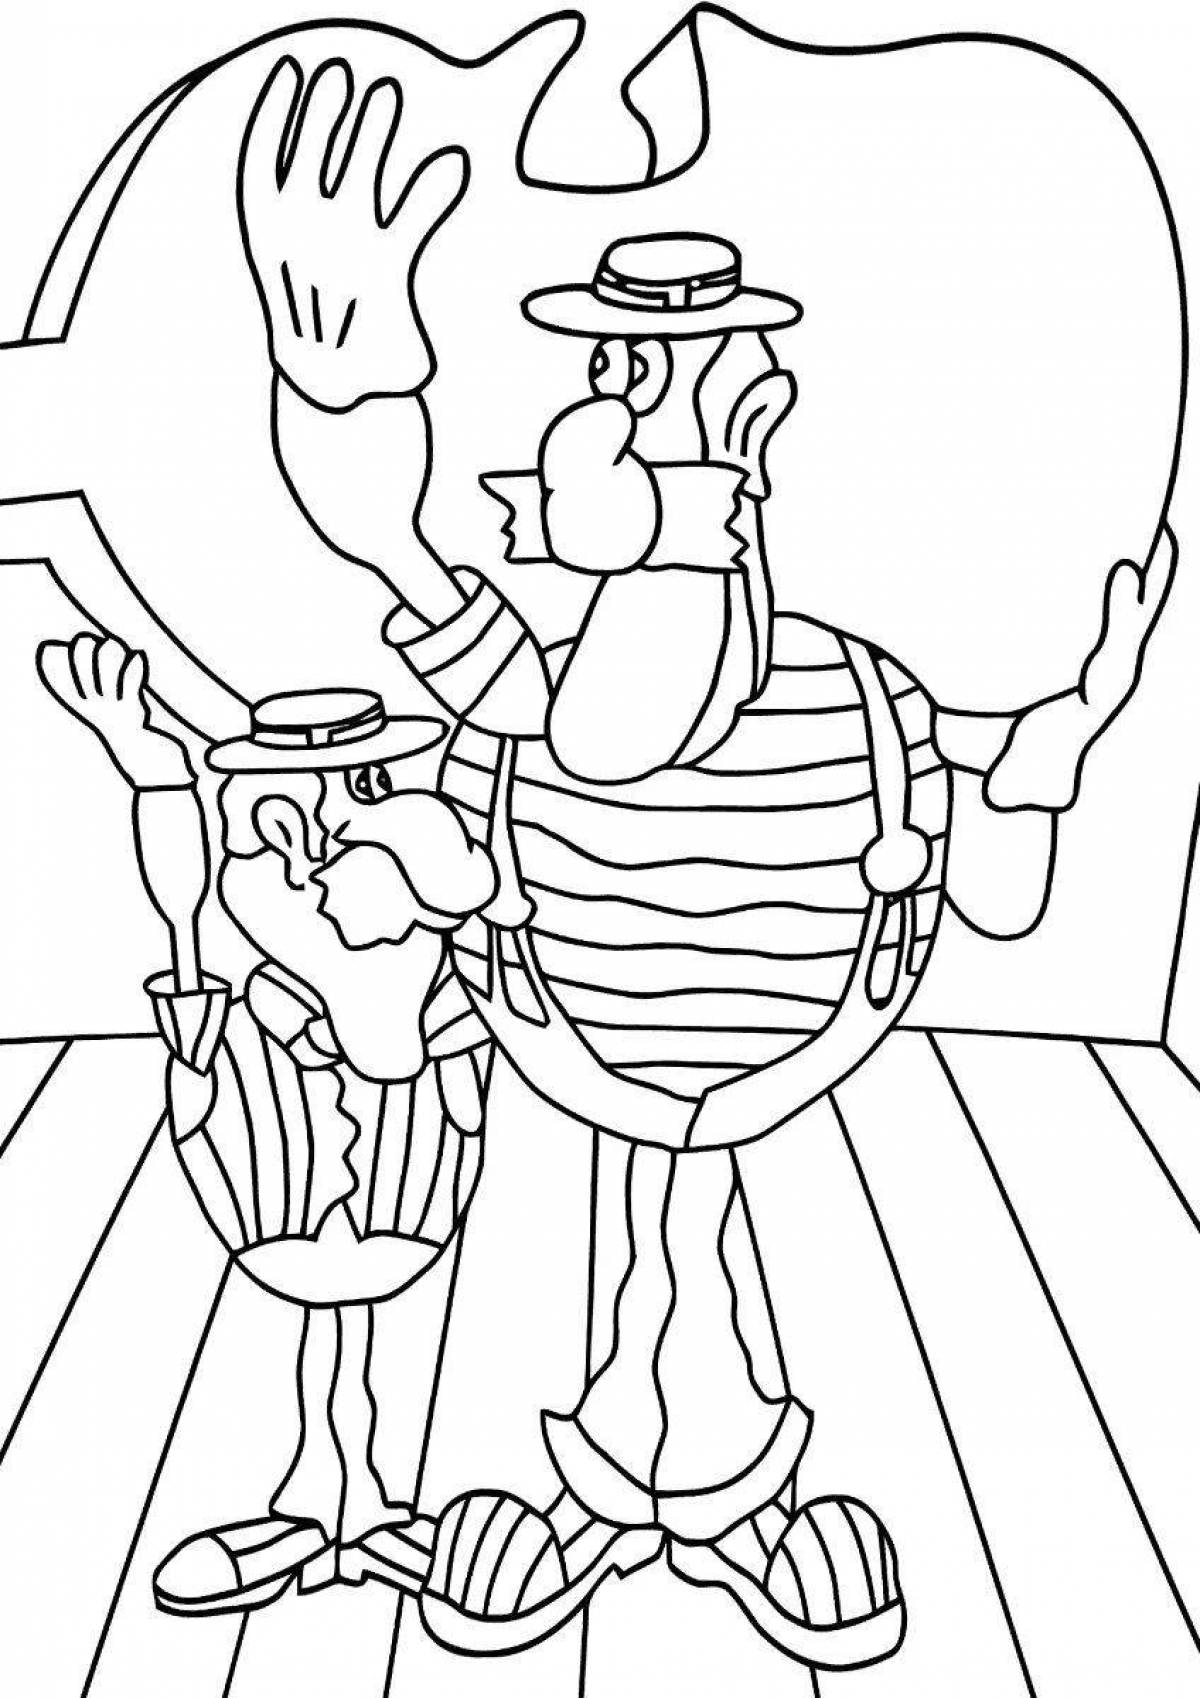 Coloring page cheerful captain vrungel